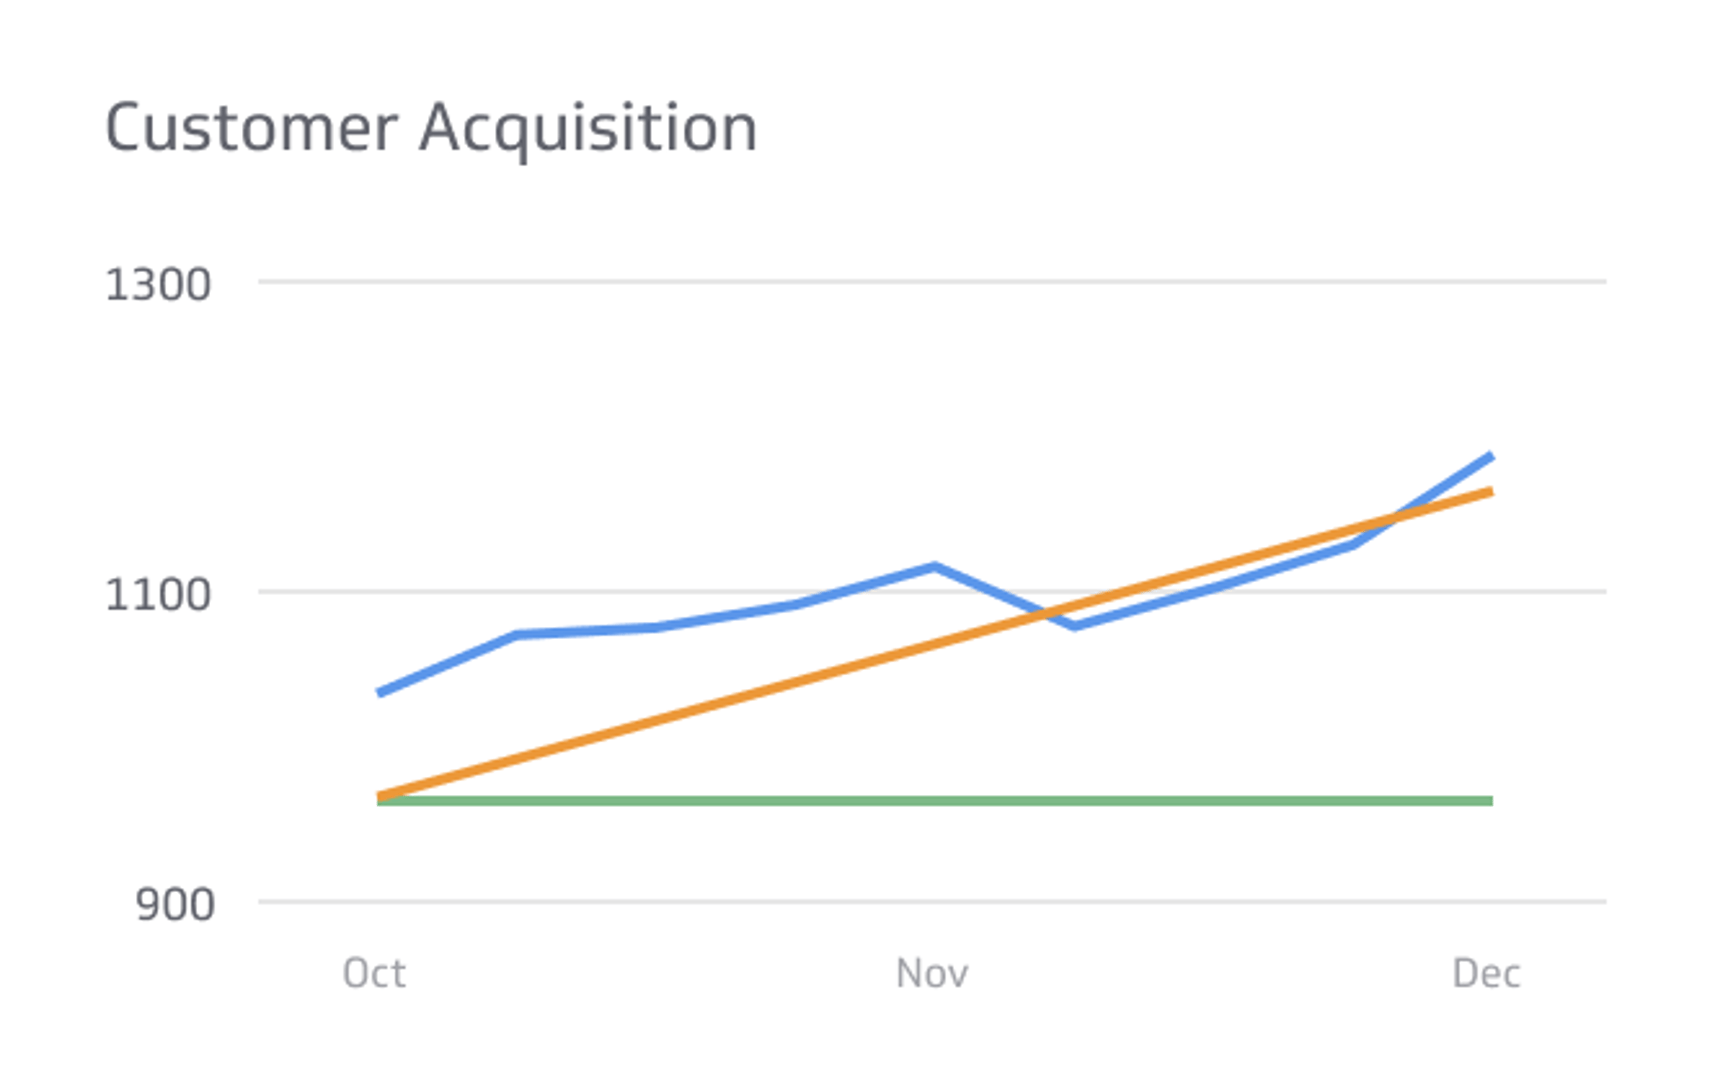 Related KPI Examples - Customer Acquisition Metric